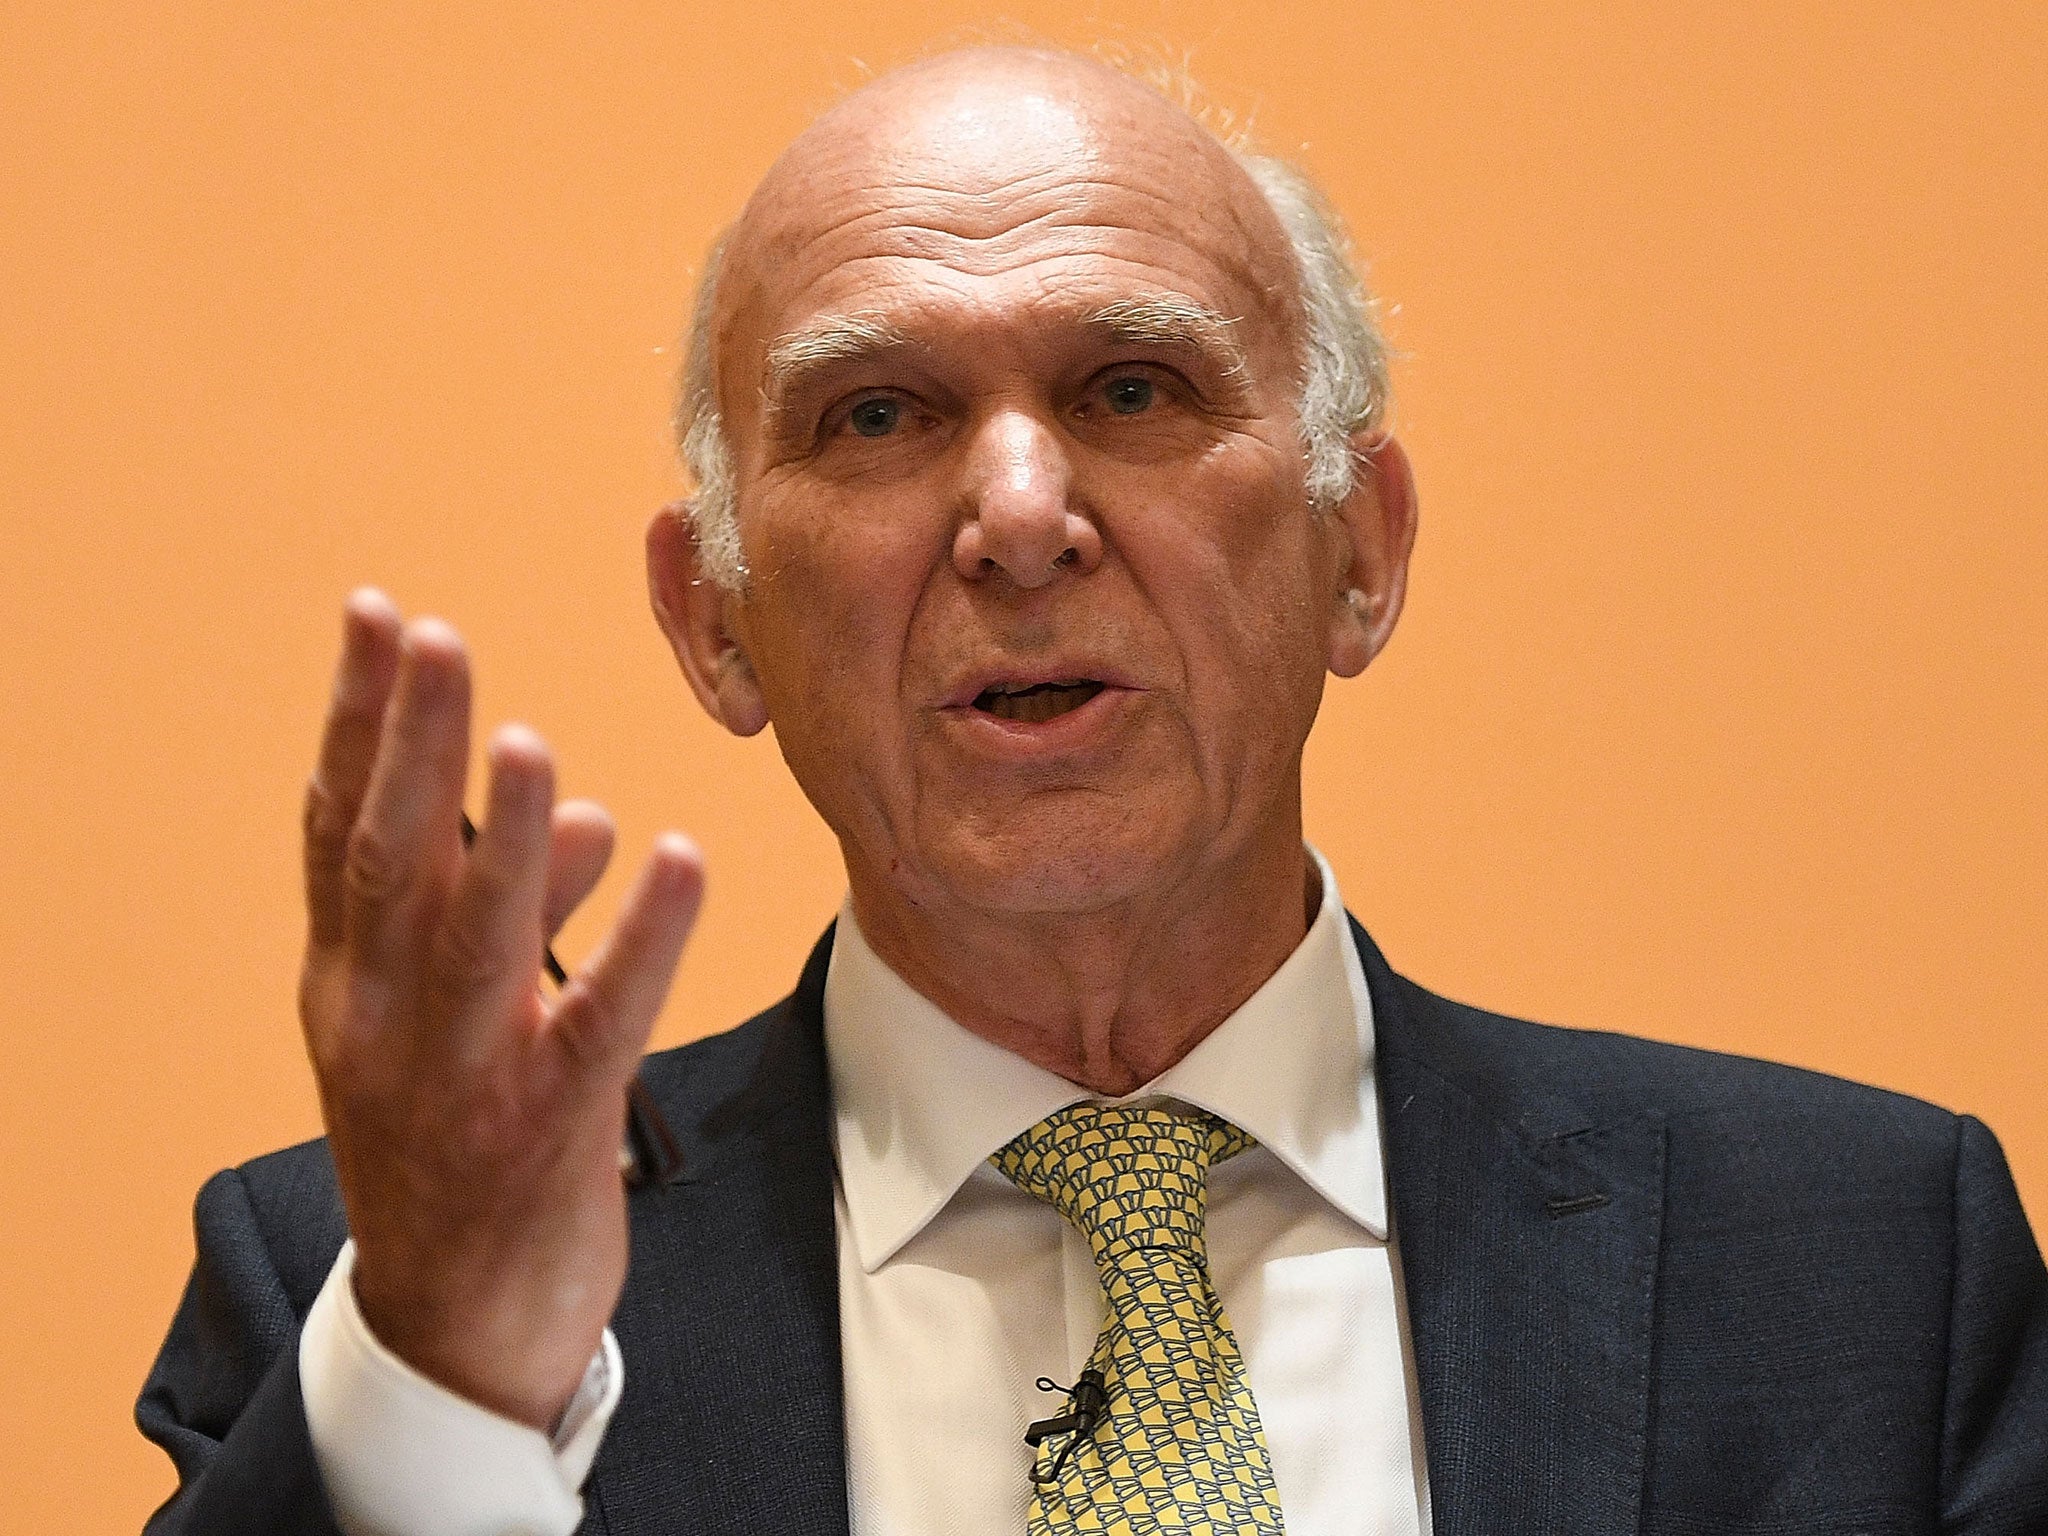 Vince Cable will cite the impact of the Grenfell Tower fire as showing 'something stirring around the idea of inequality'